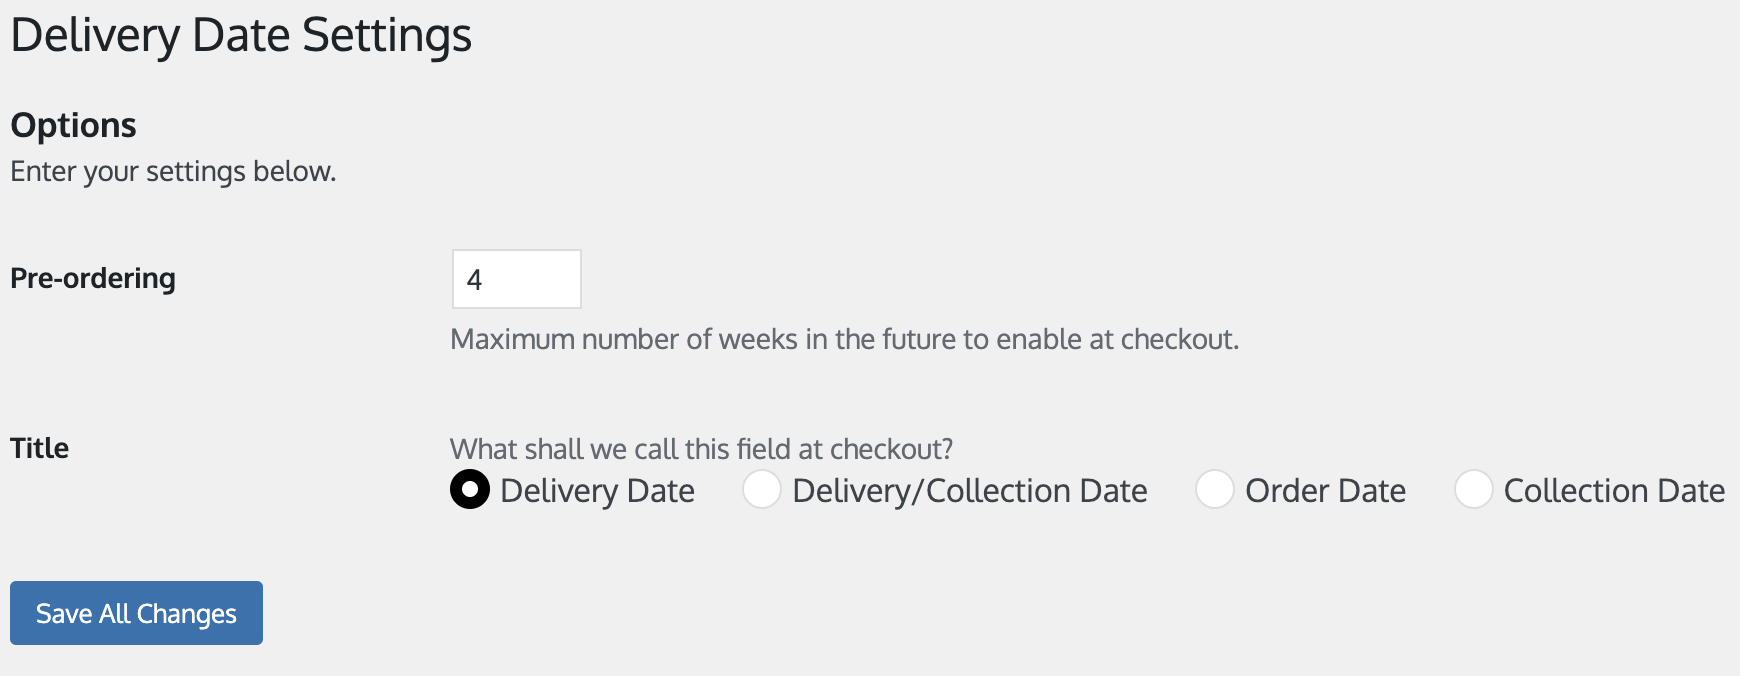 Delivery Timeslots Settings page